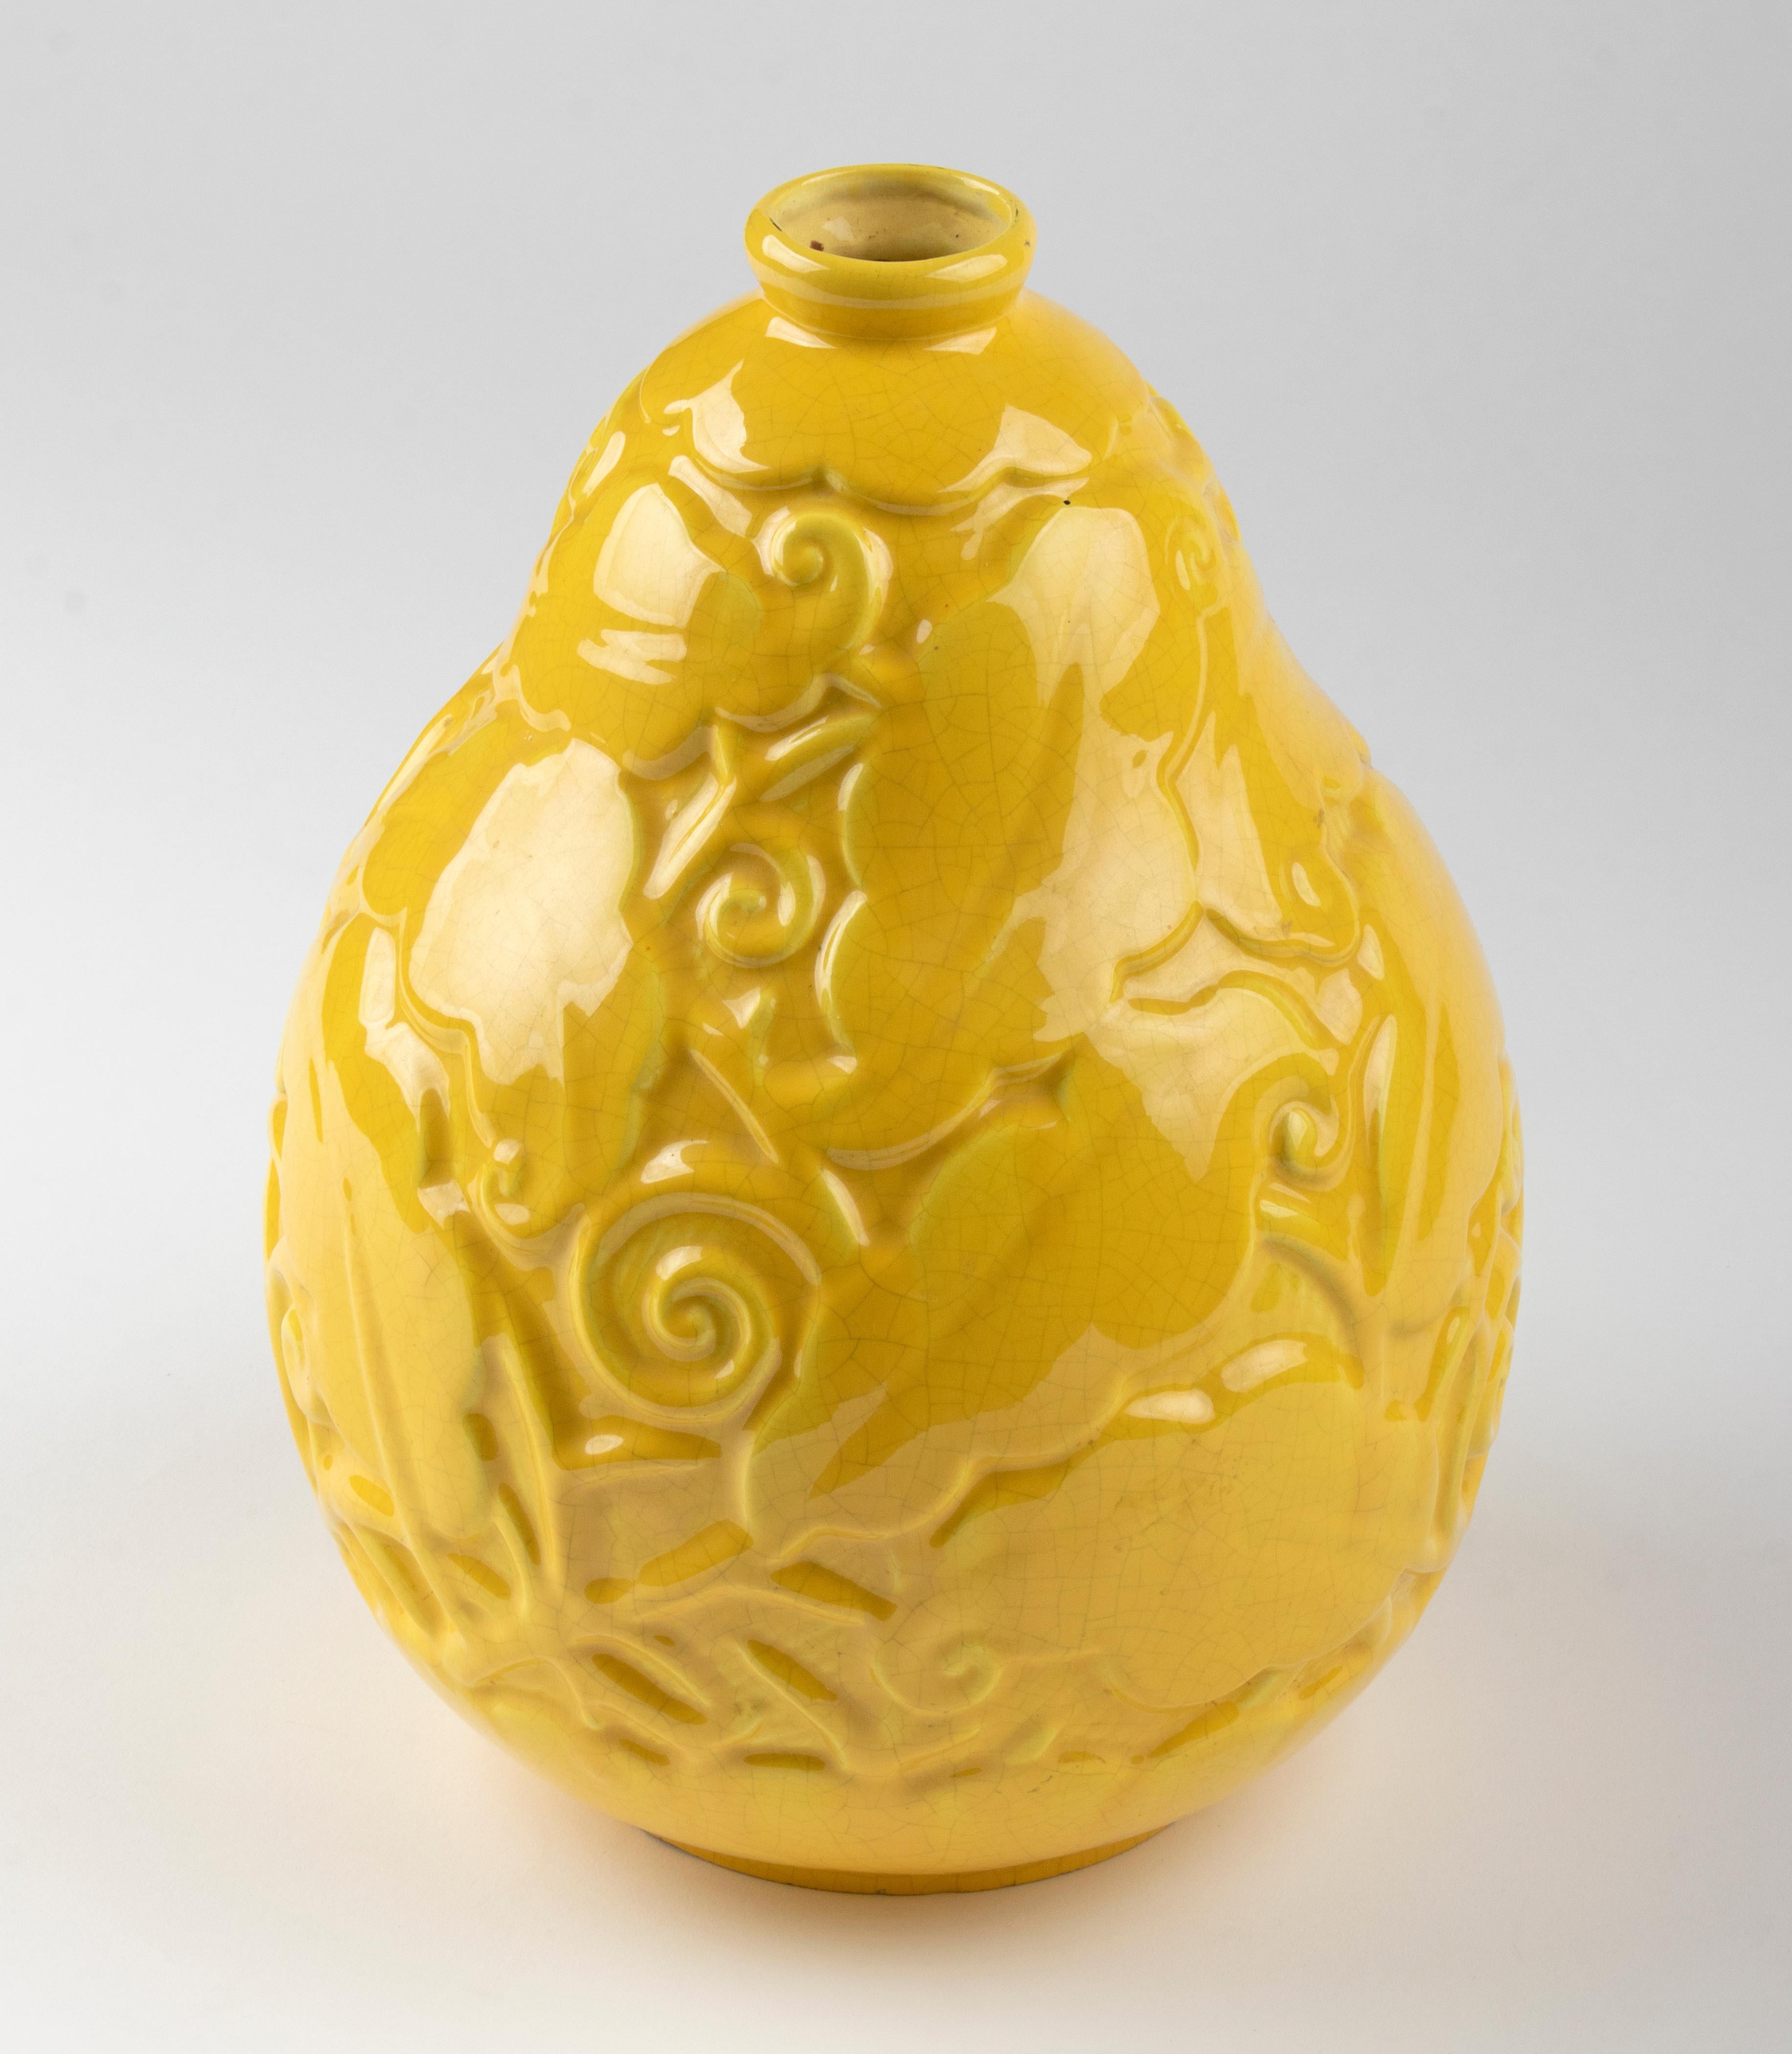 Early 20th Century Ceramic Art Deco Vase Made by Saint-Clément 3